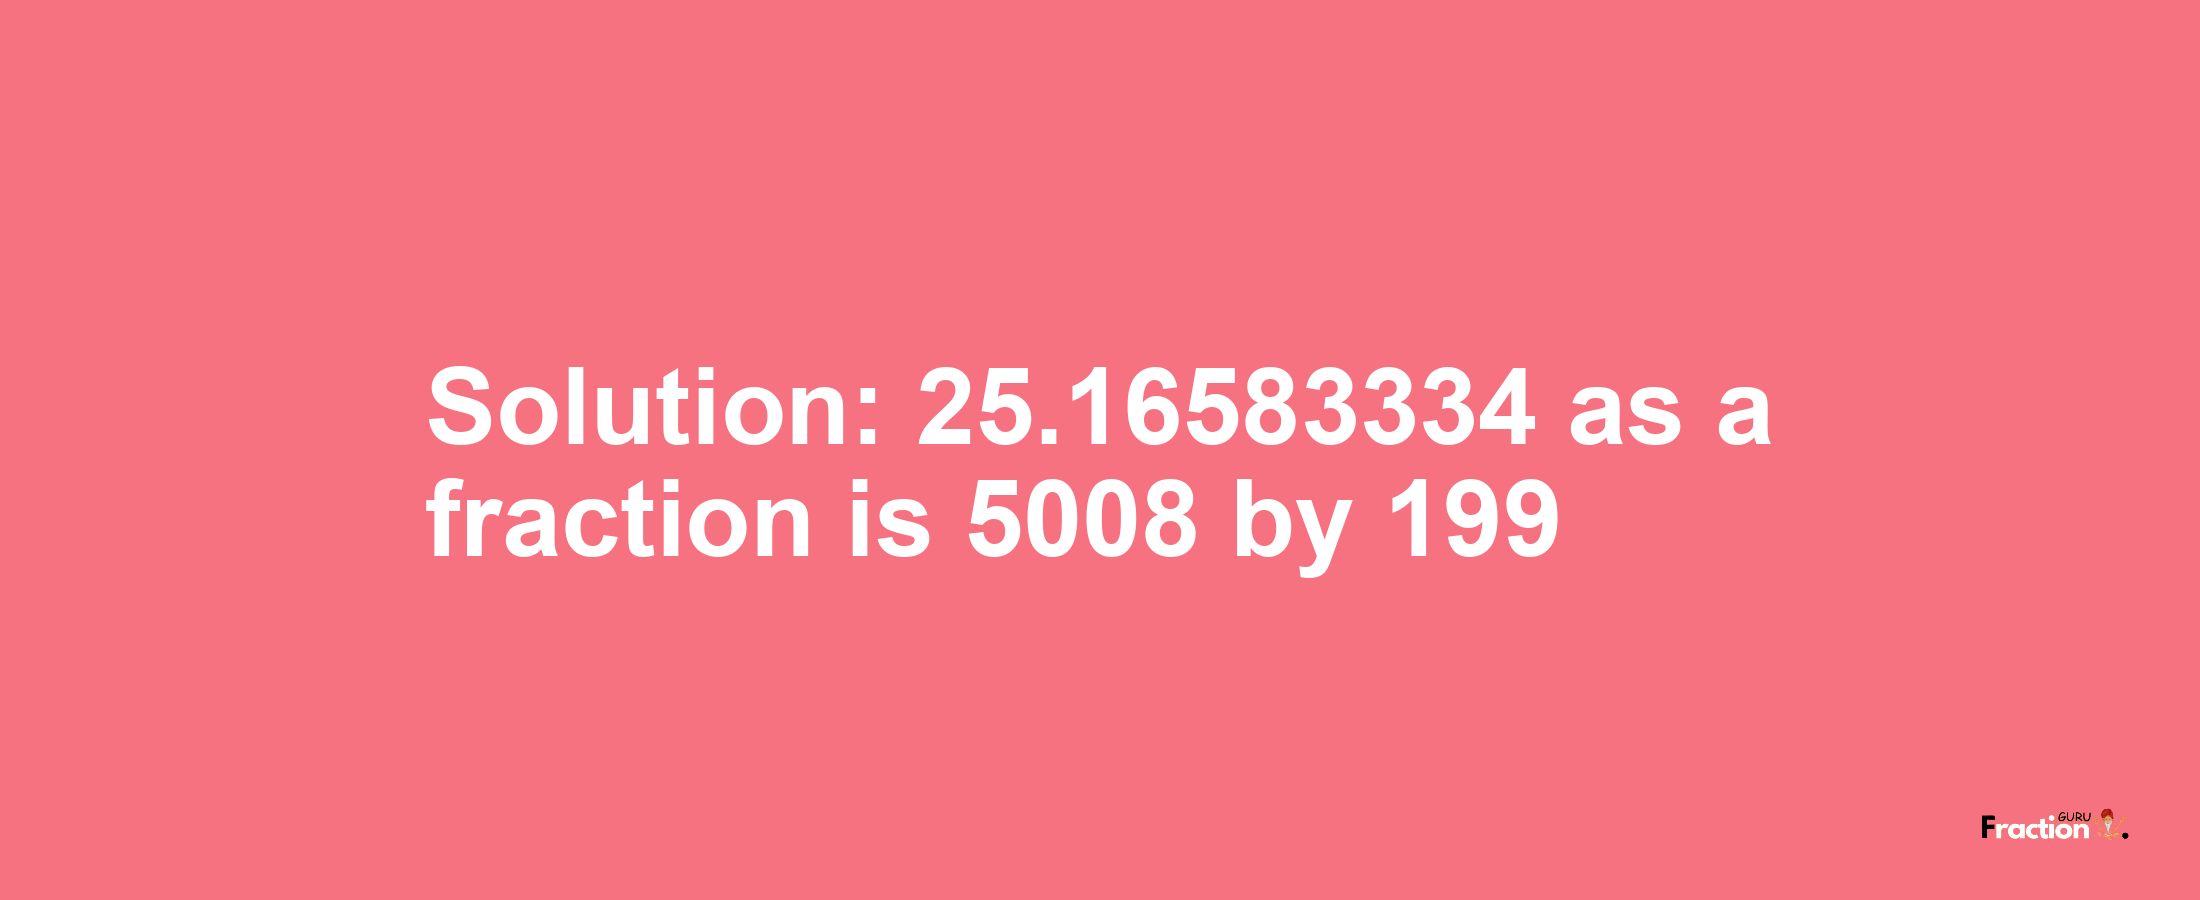 Solution:25.16583334 as a fraction is 5008/199